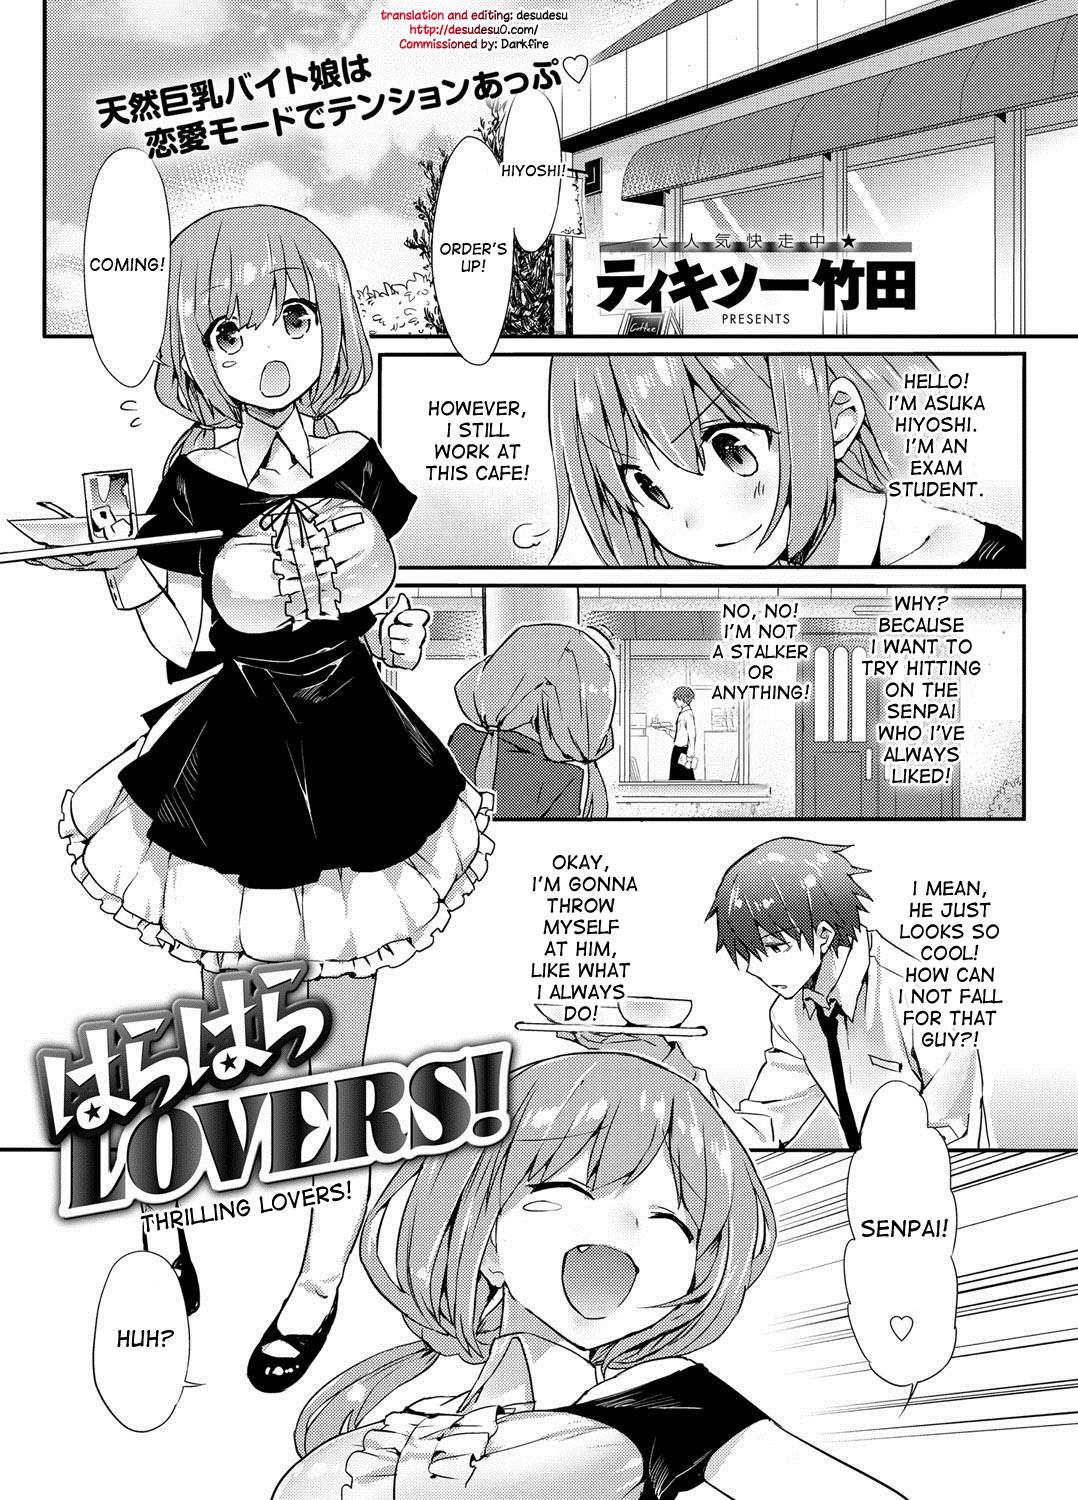 Harahara Lovers! | Thrilling Lovers! 0